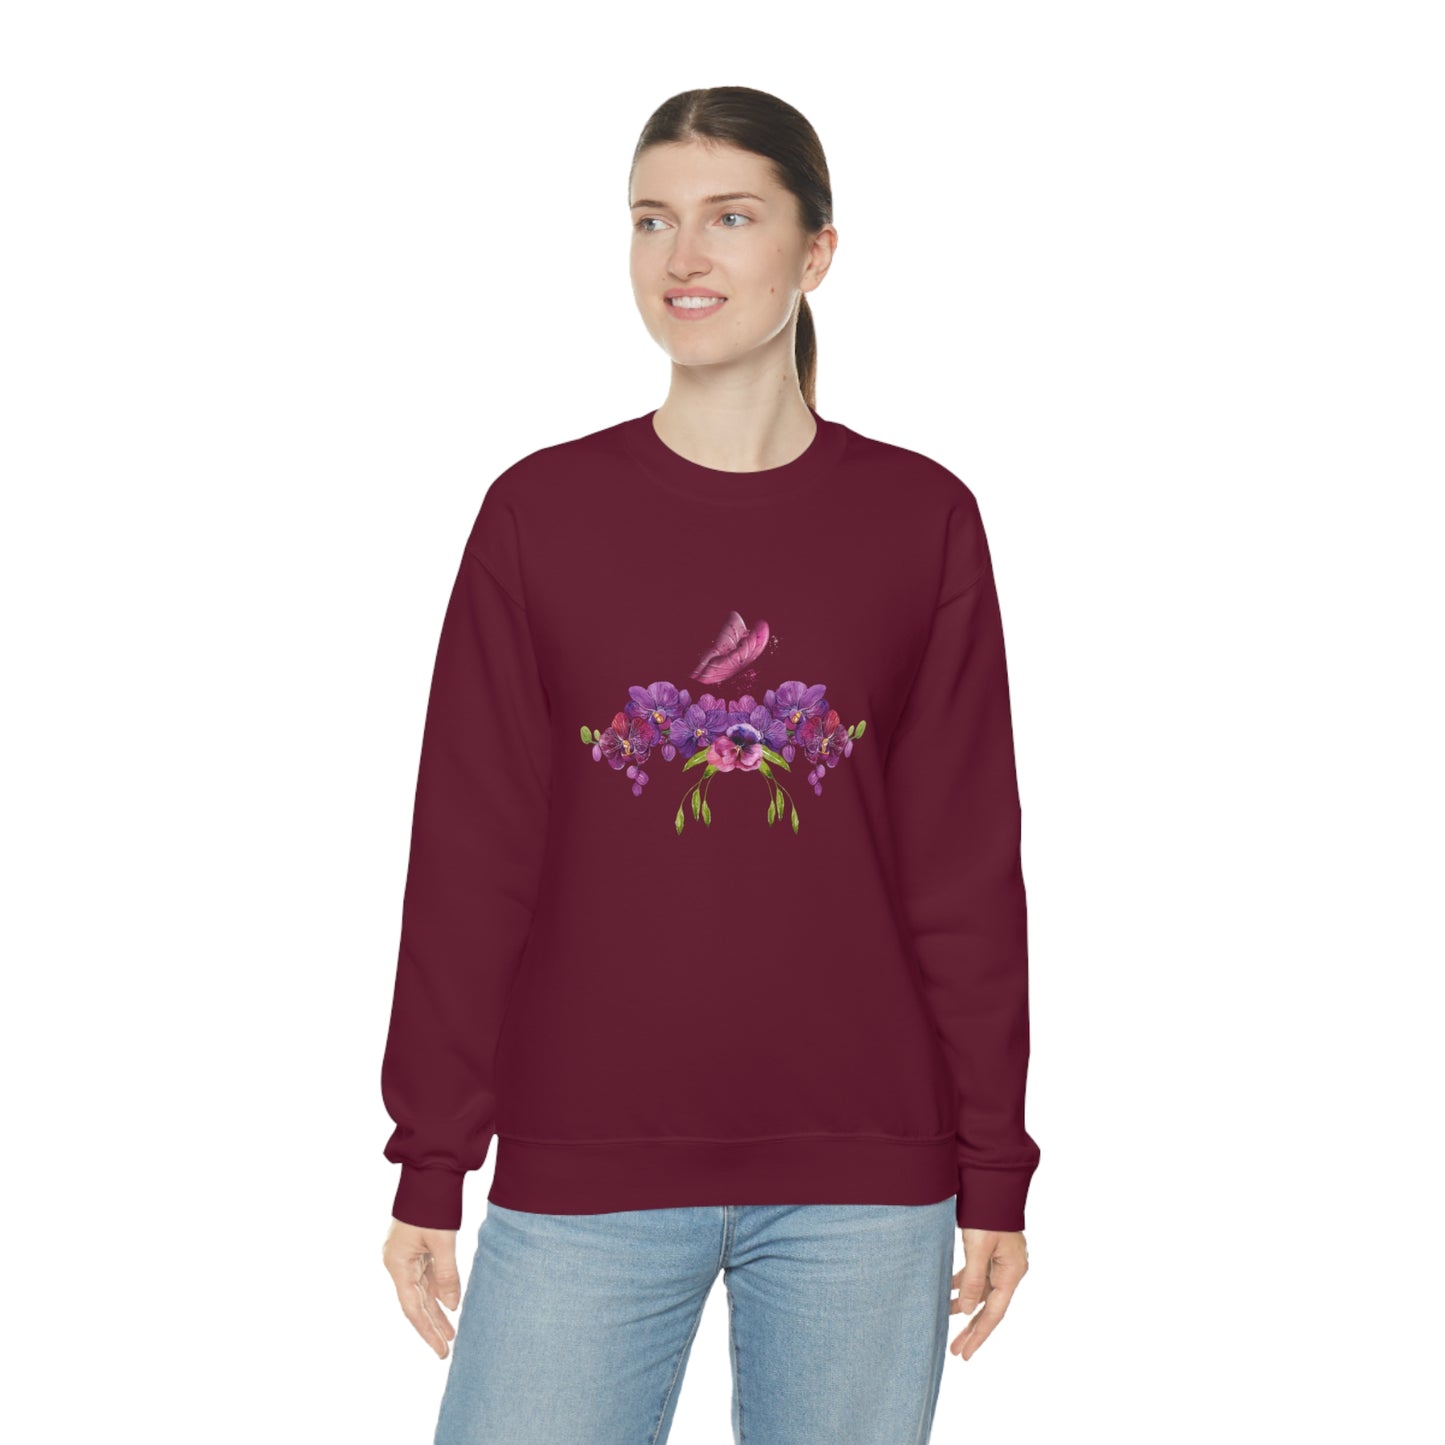 Mock up of a tall woman wearing the Maroon shirt